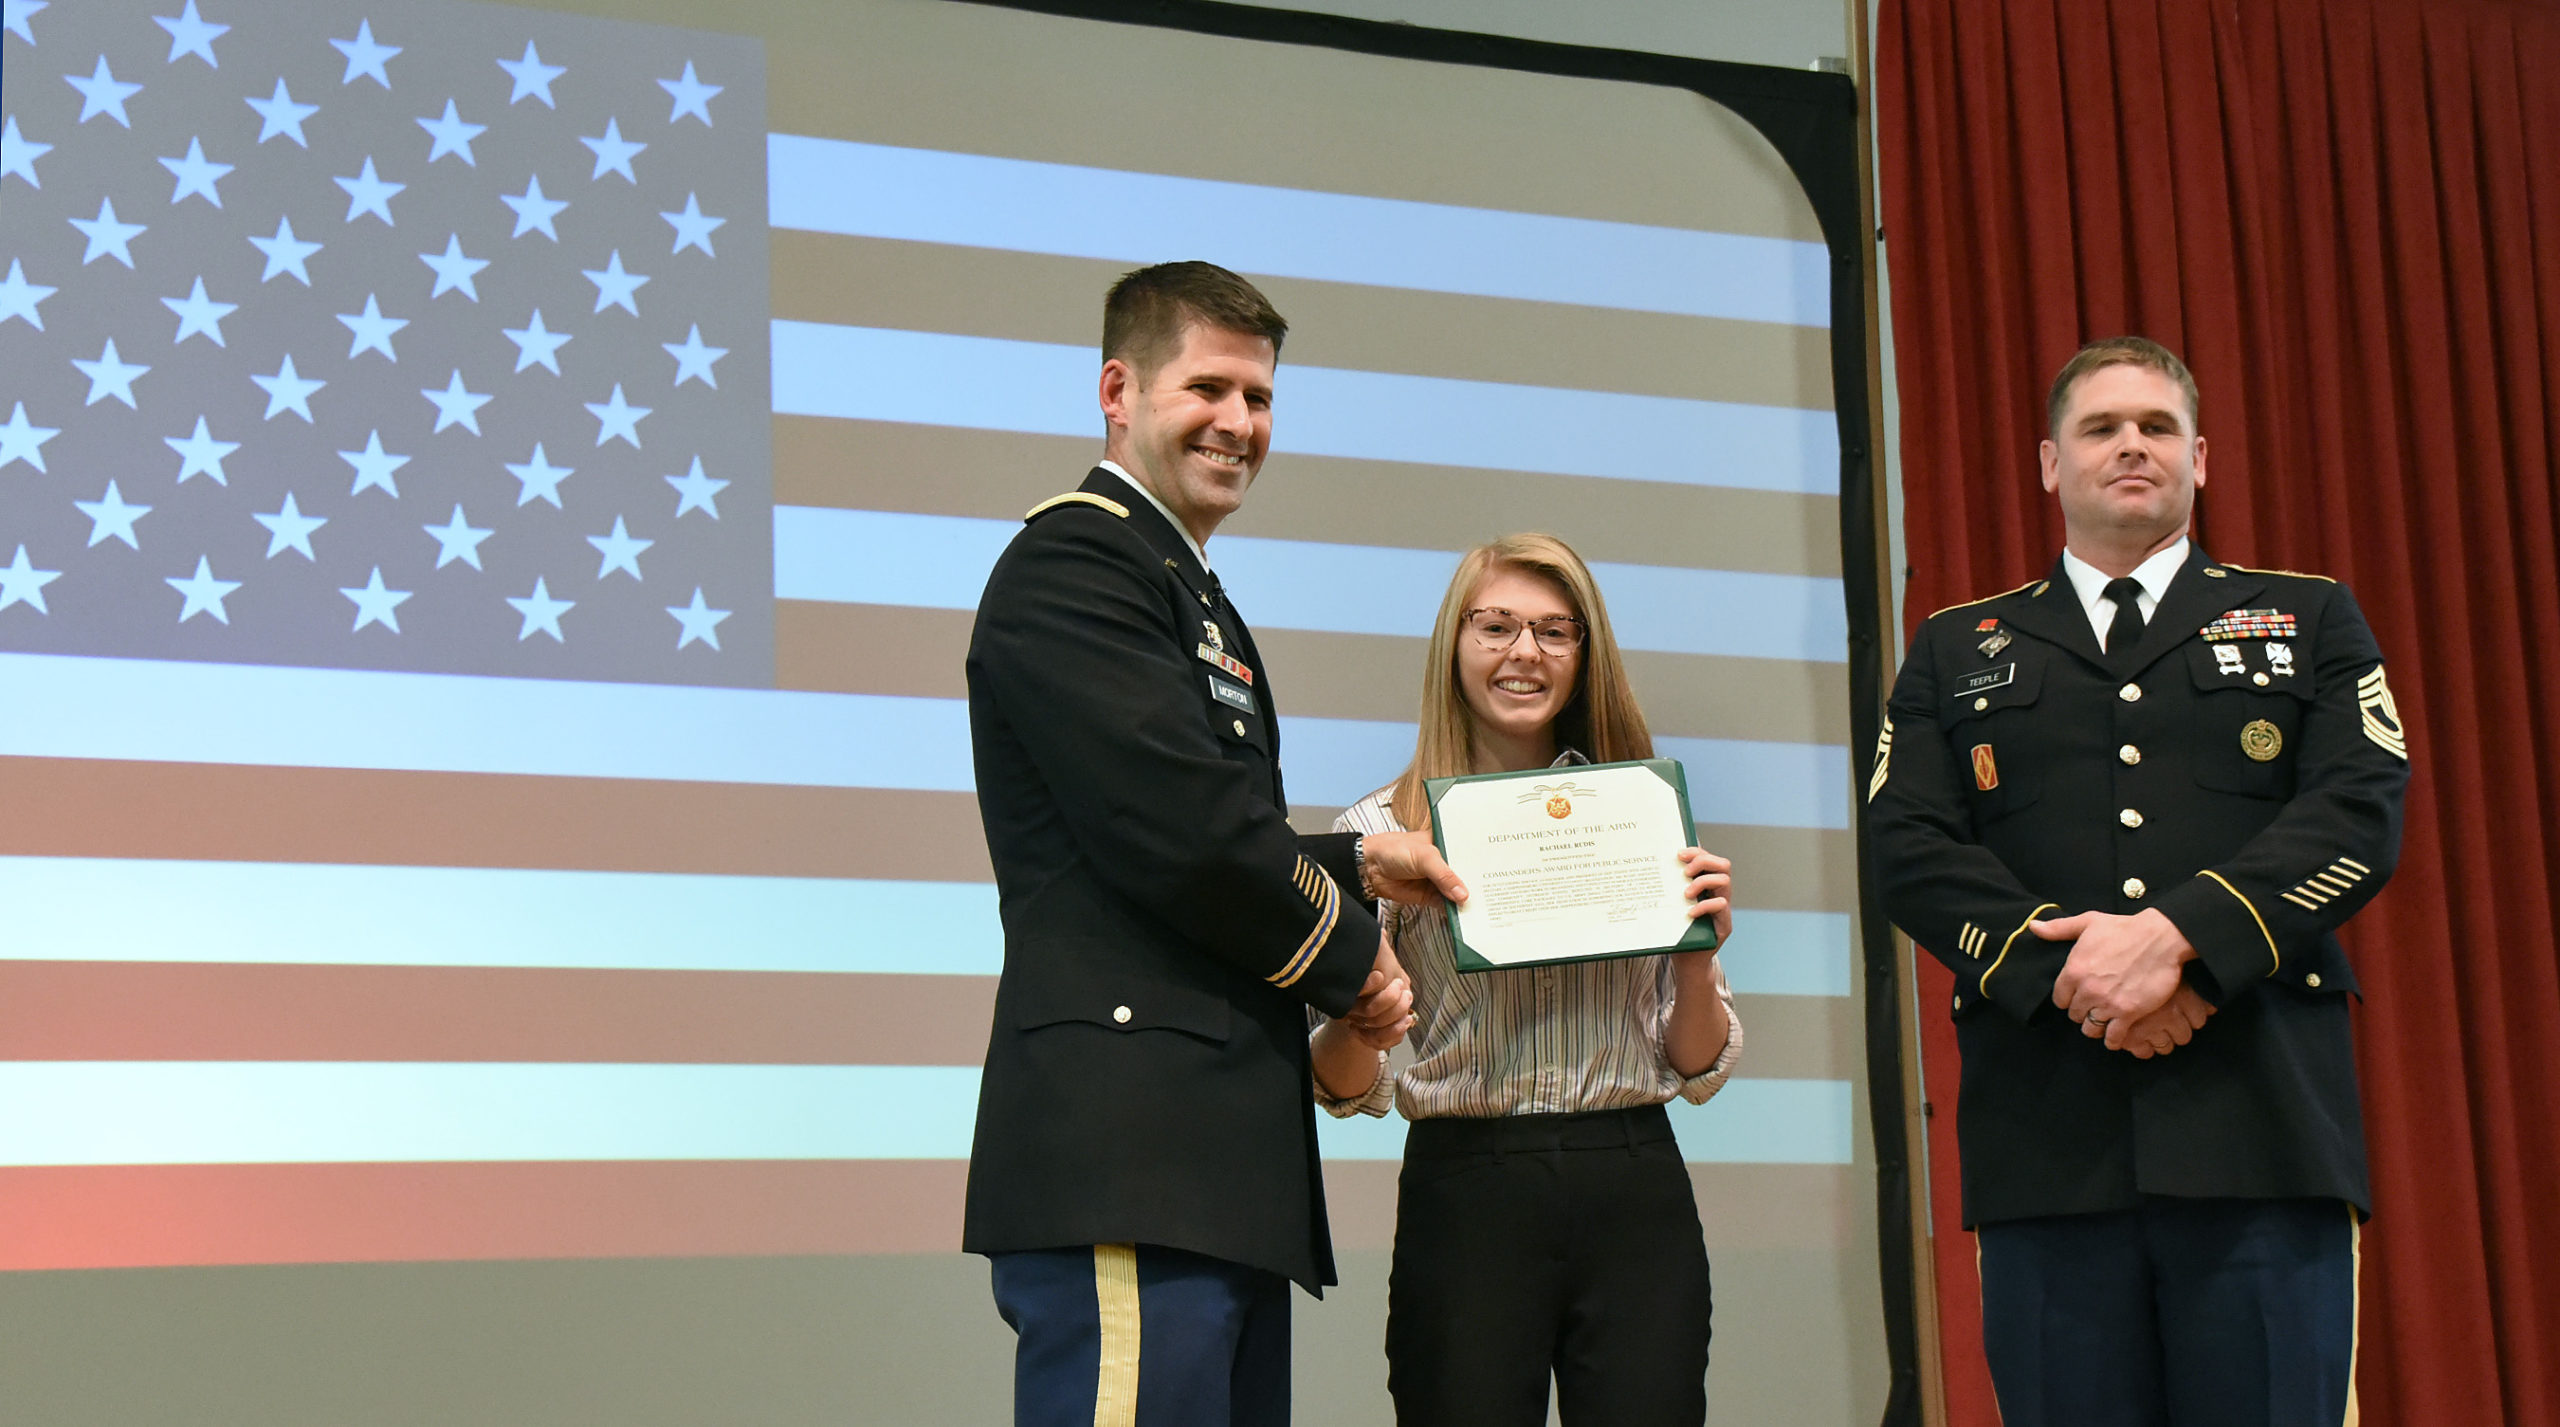 Rachael Rudis receives the Department of the Army's Commander Award for Public Service for her student organization Ship Stands with America's Military.